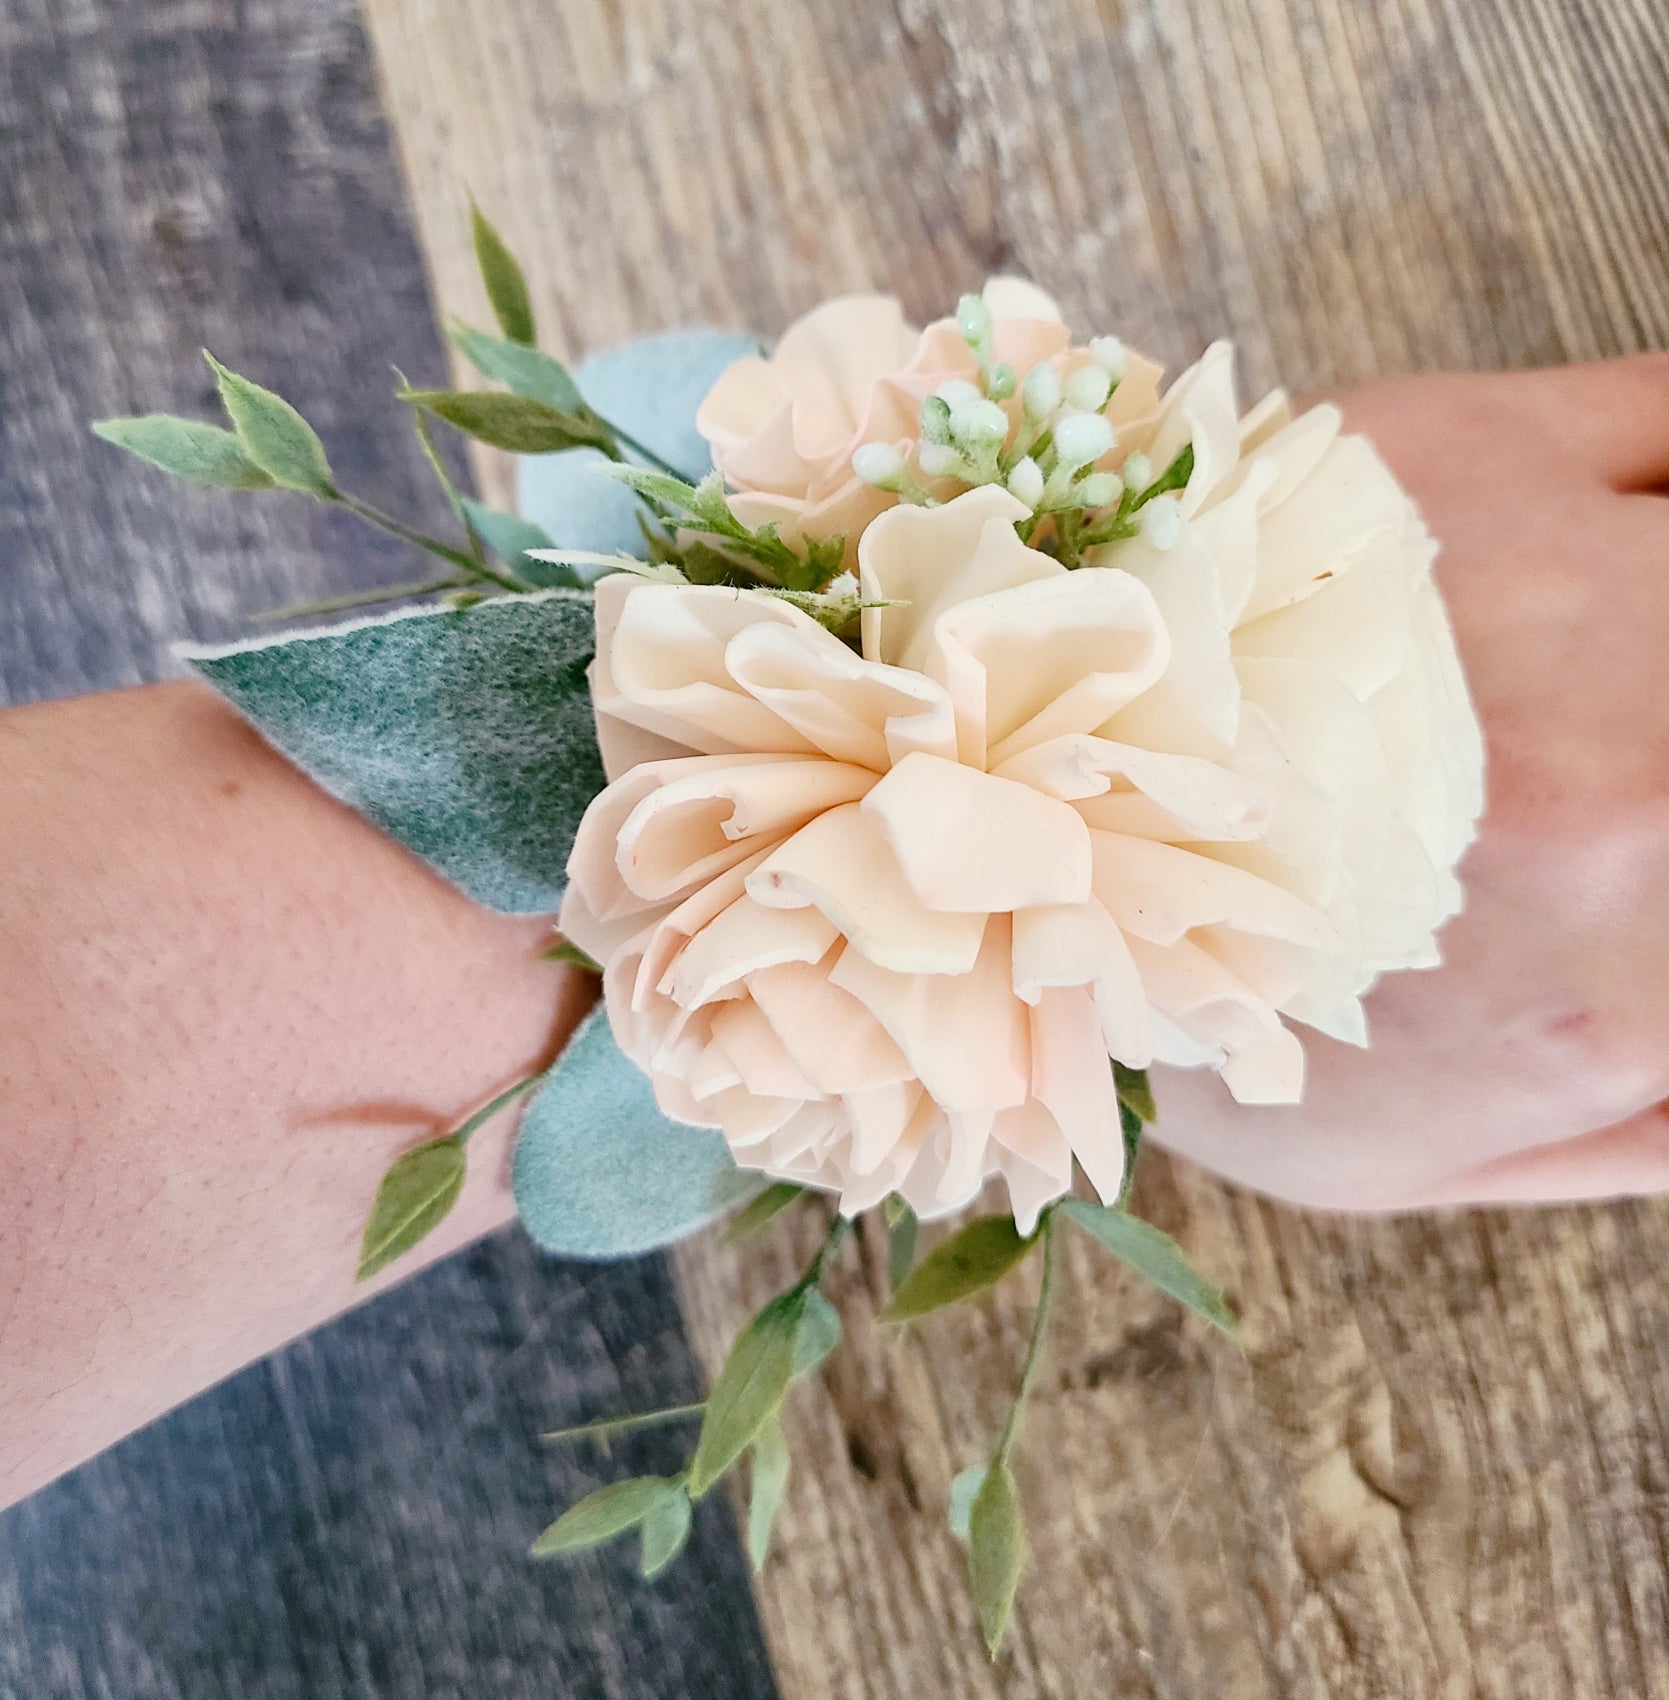 Ansuma Peony Wrist Corsage Bracelet with Berries and Green Leaves, Vintage  Wedding Corsage for Bridesmaid Bridal Shower Wedding Flower Corsage Lace